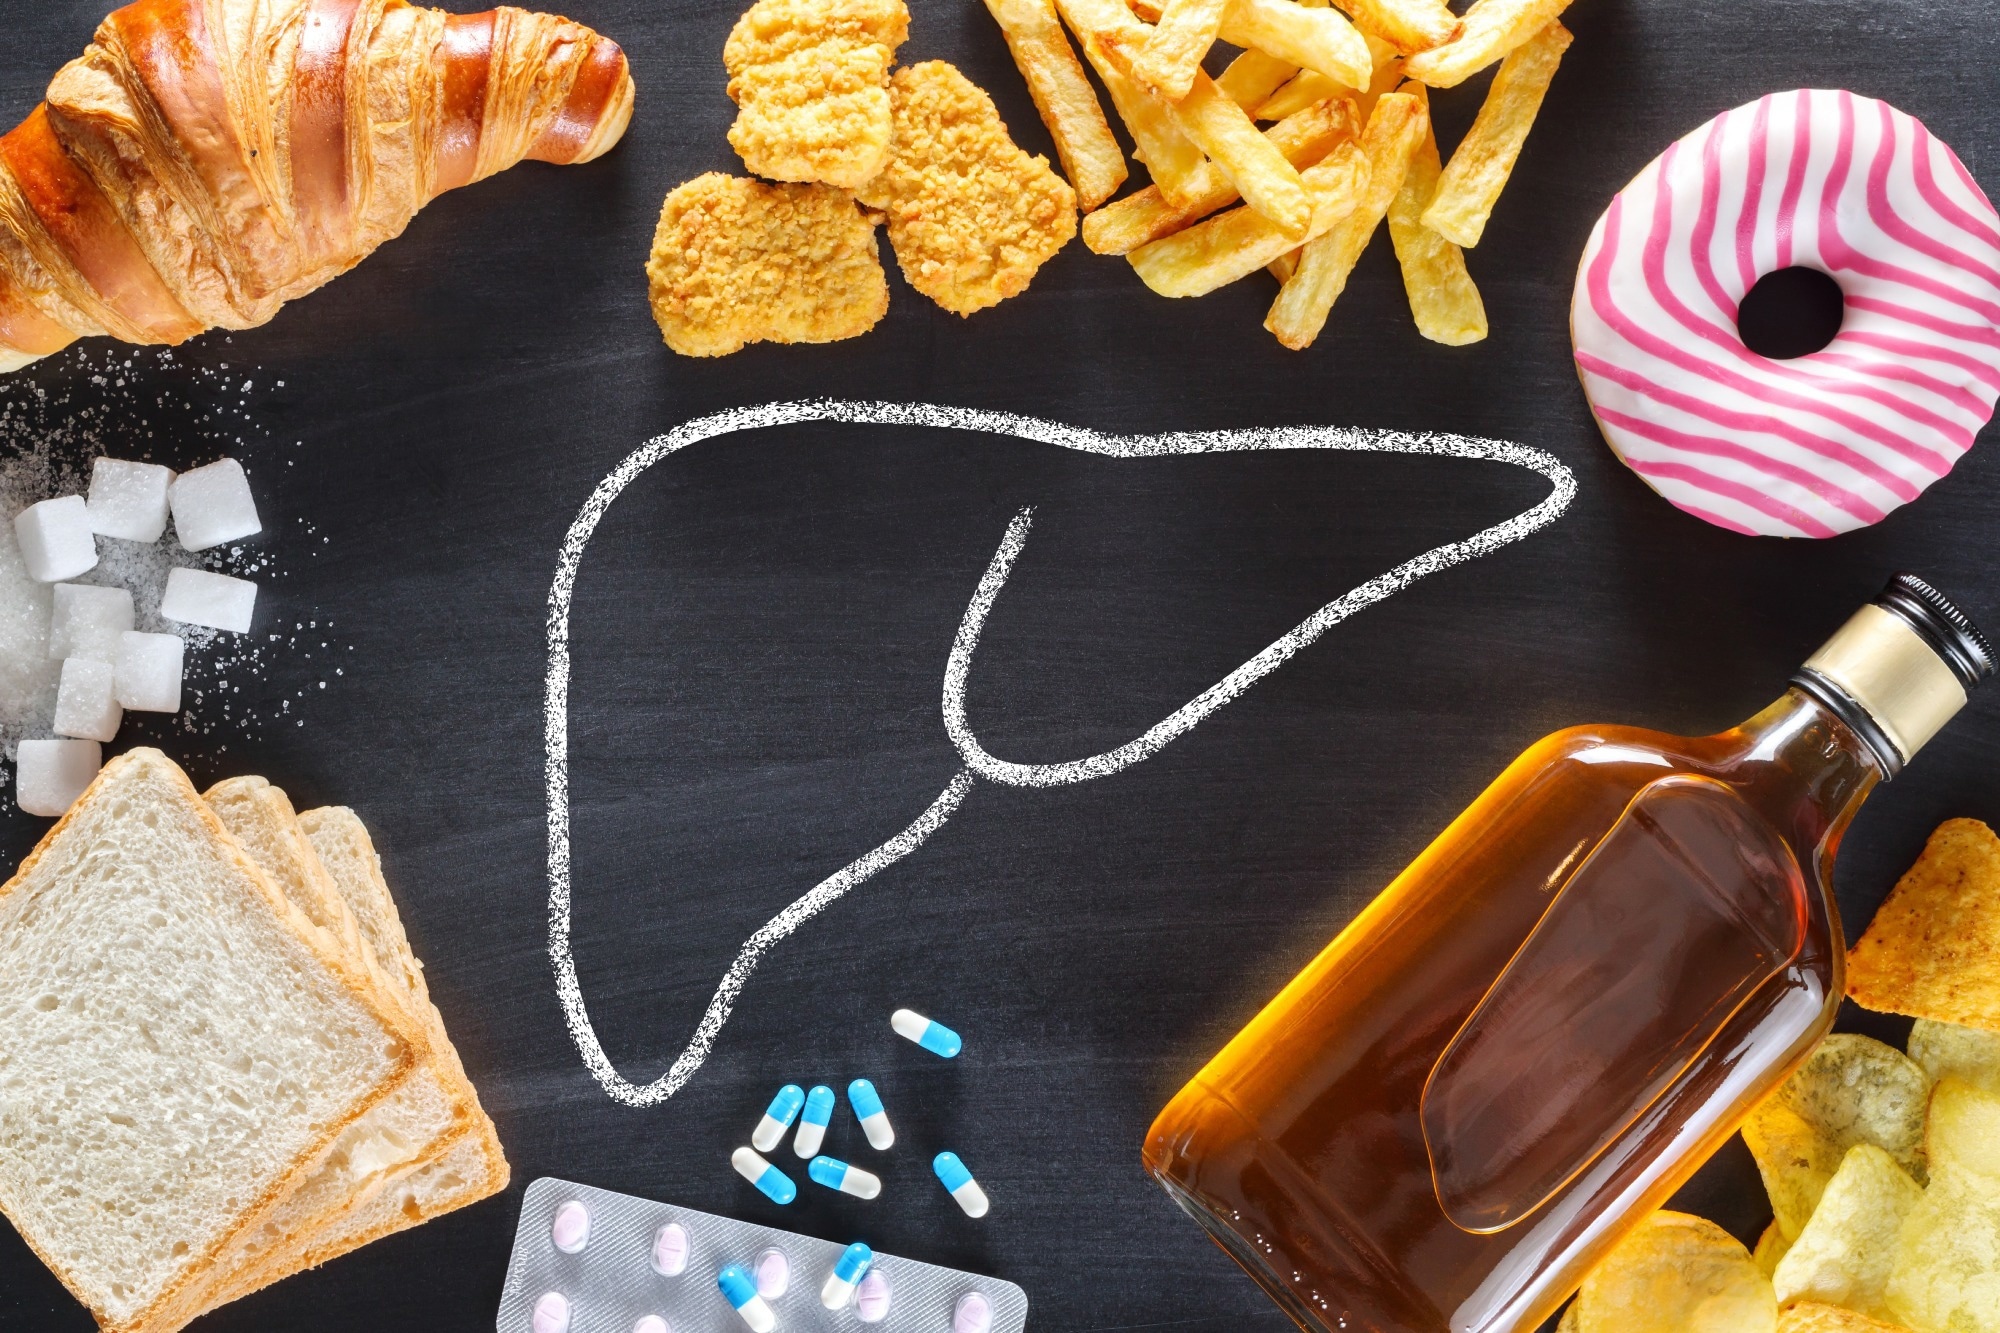 Study: Ultra-Processed Food Intake Is Associated with Non-Alcoholic Fatty Liver Disease in Adults: A Systematic Review and Meta-Analysis. Image Credit: Evan Lorne/Shutterstock.com